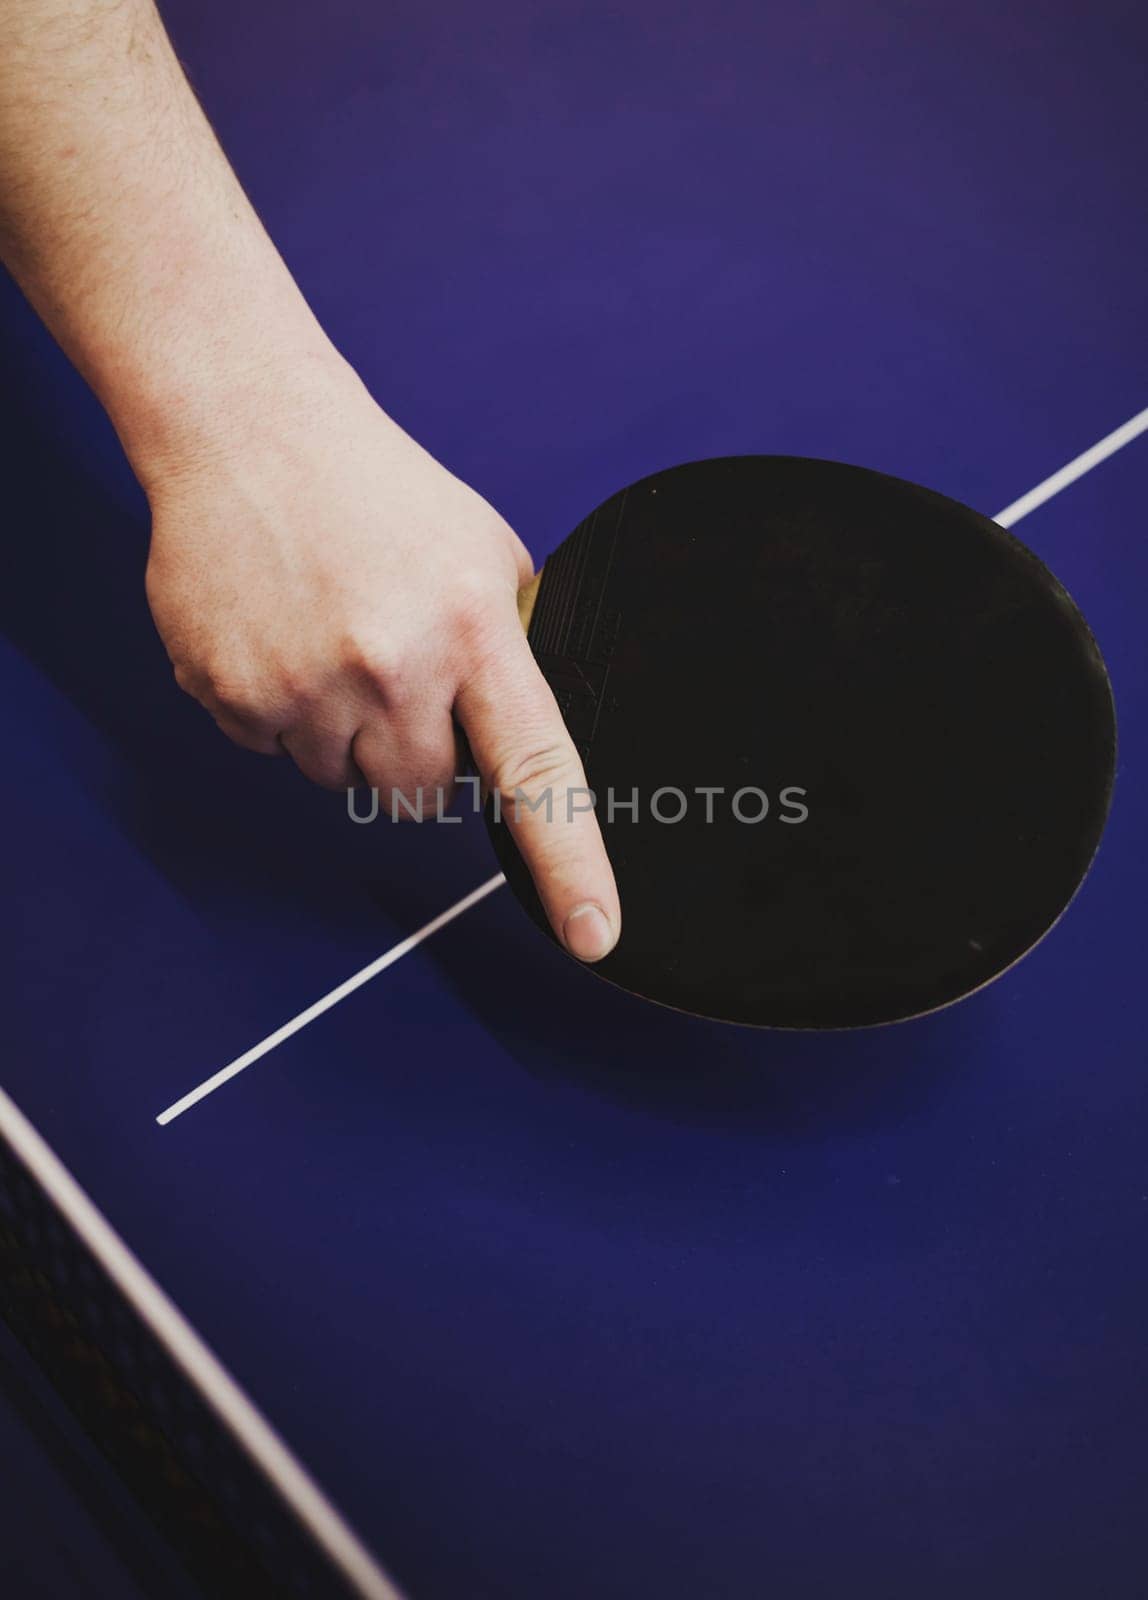 professional ping pong player by Ladouski